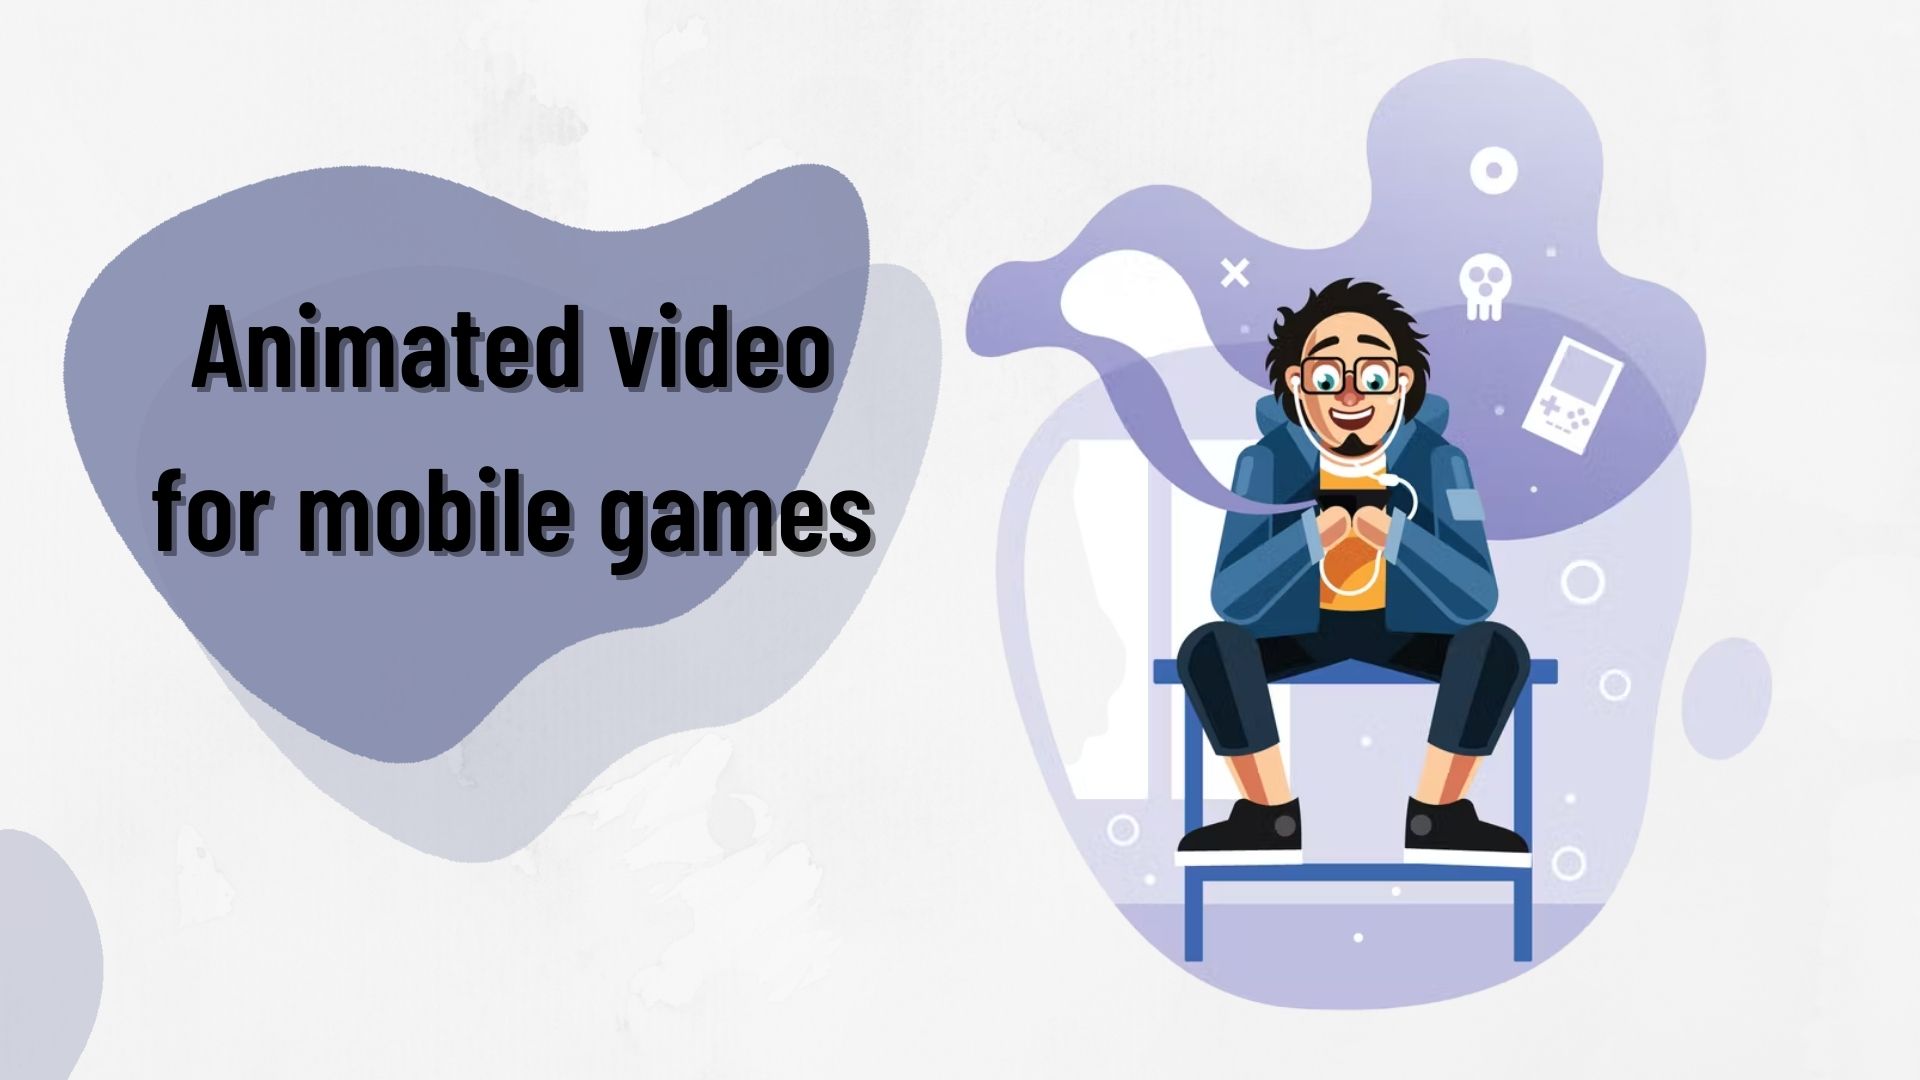 Animated video for mobile games